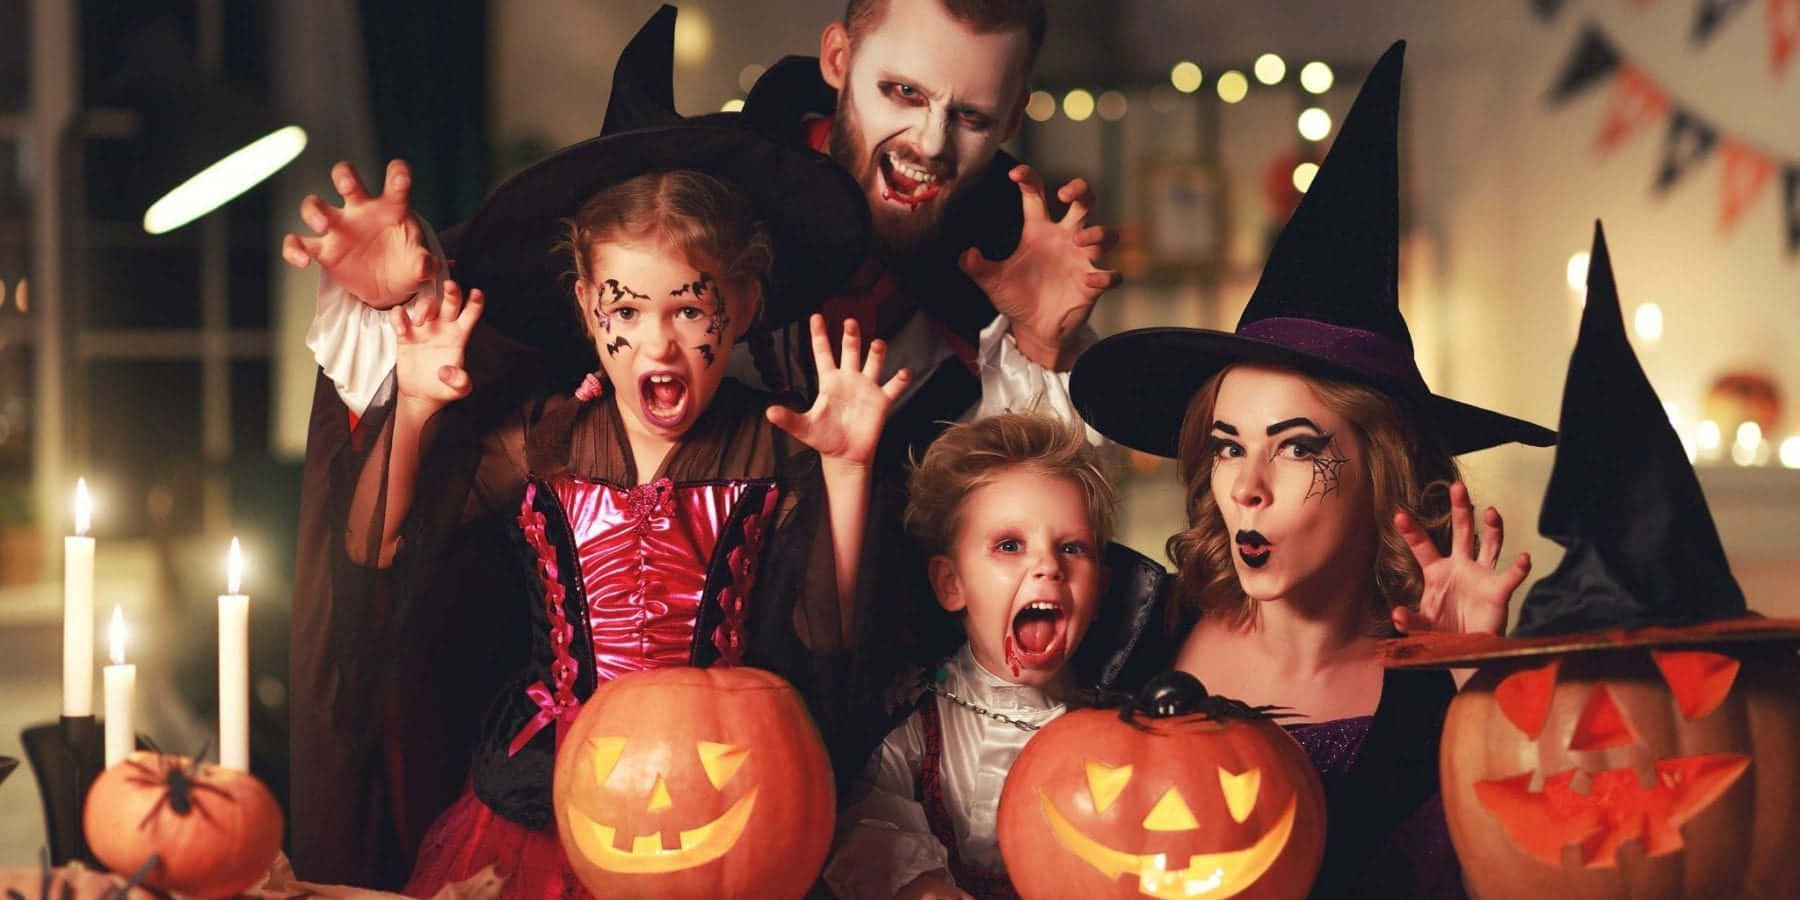 A Family Dressed Up In Halloween Costumes